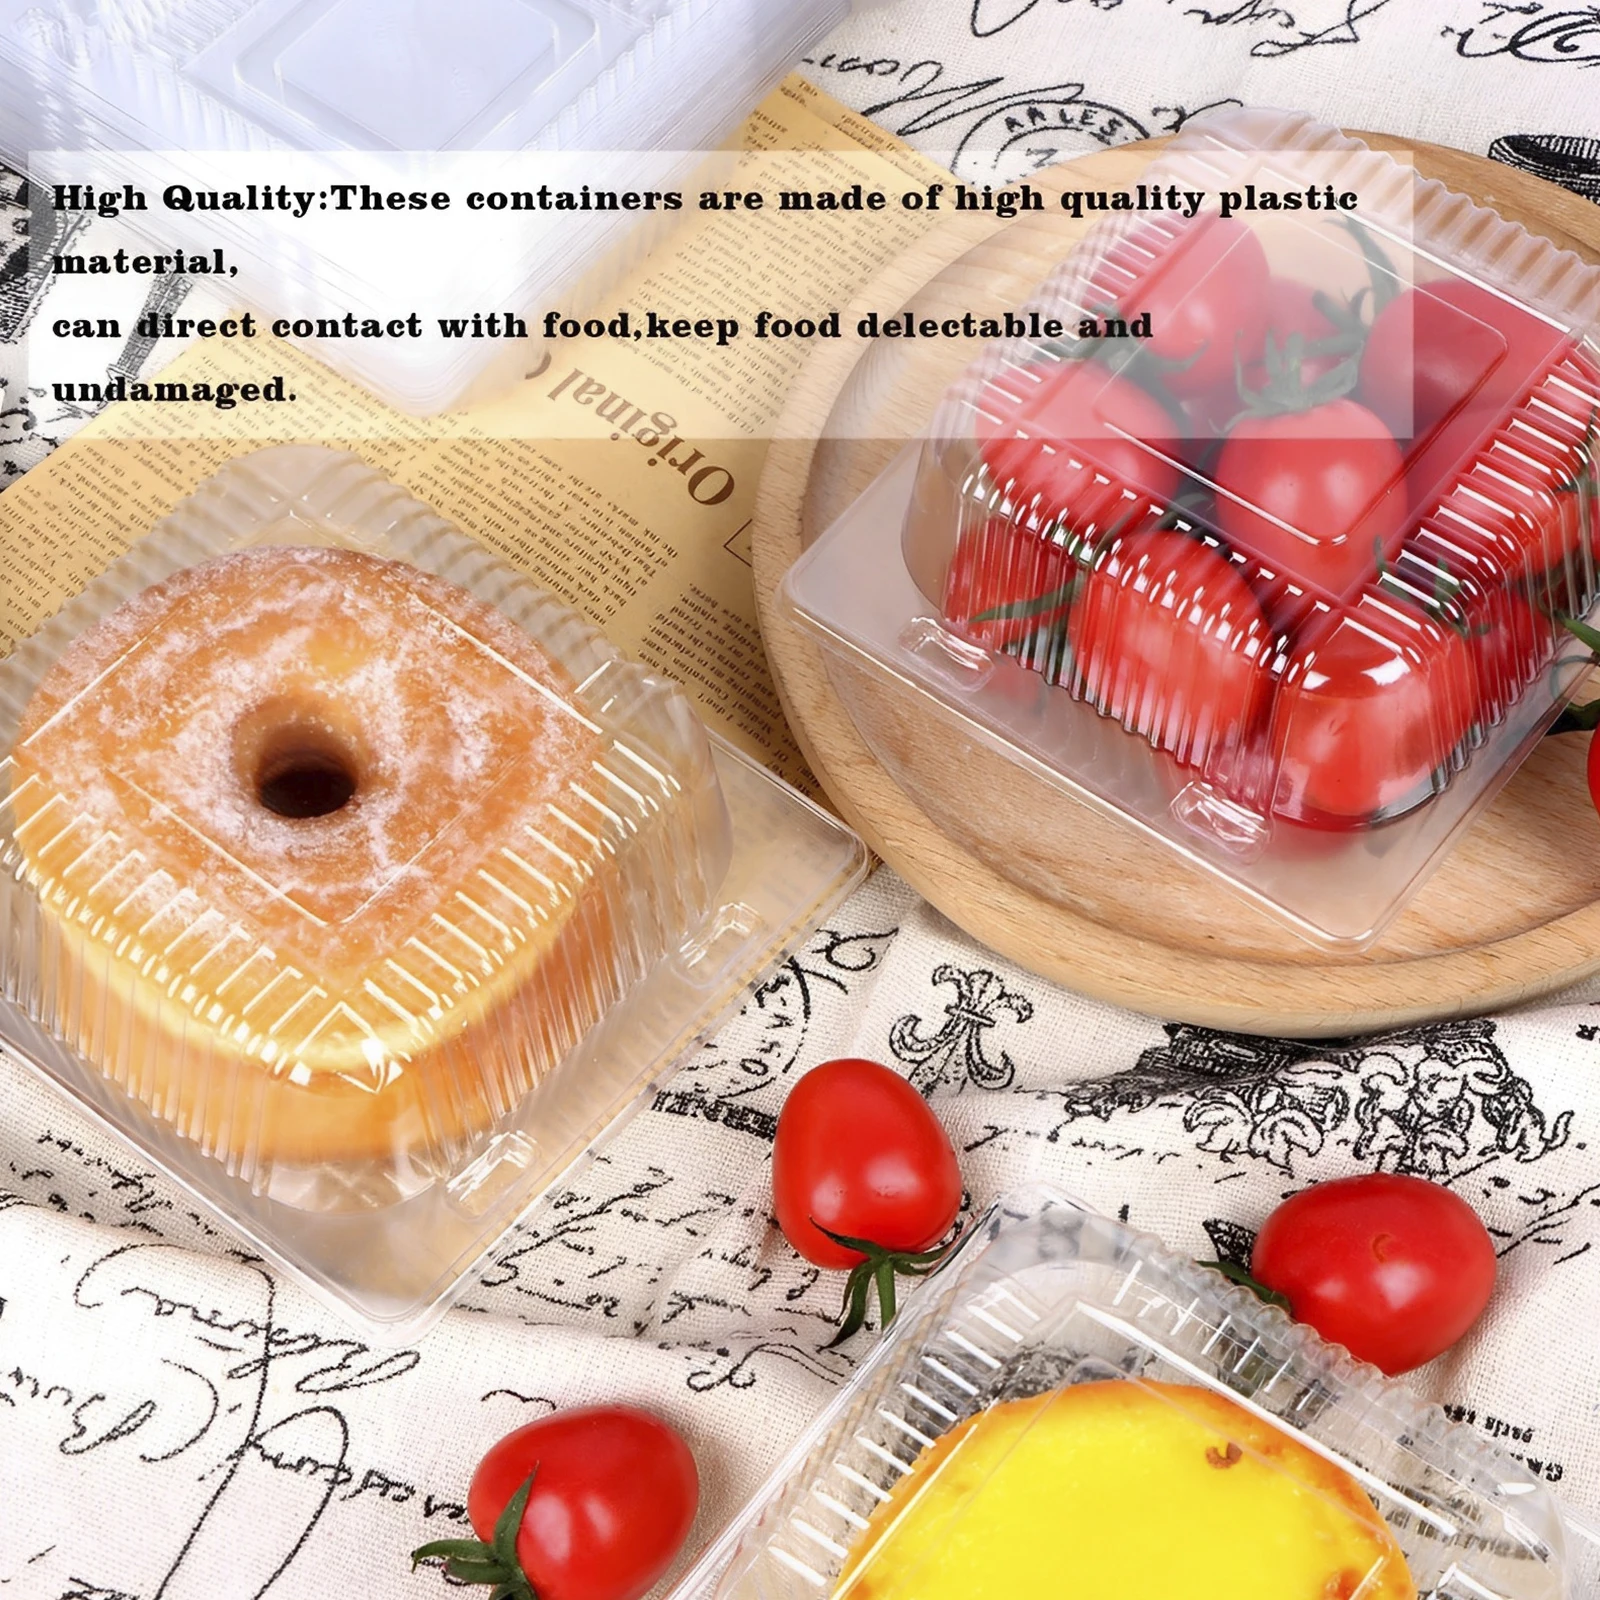 100Pcs Cake Slice Boxes Disposable Food Container with Lid Stackable Clear Storage Box for Pie Cupcake Dessert Kitchenware